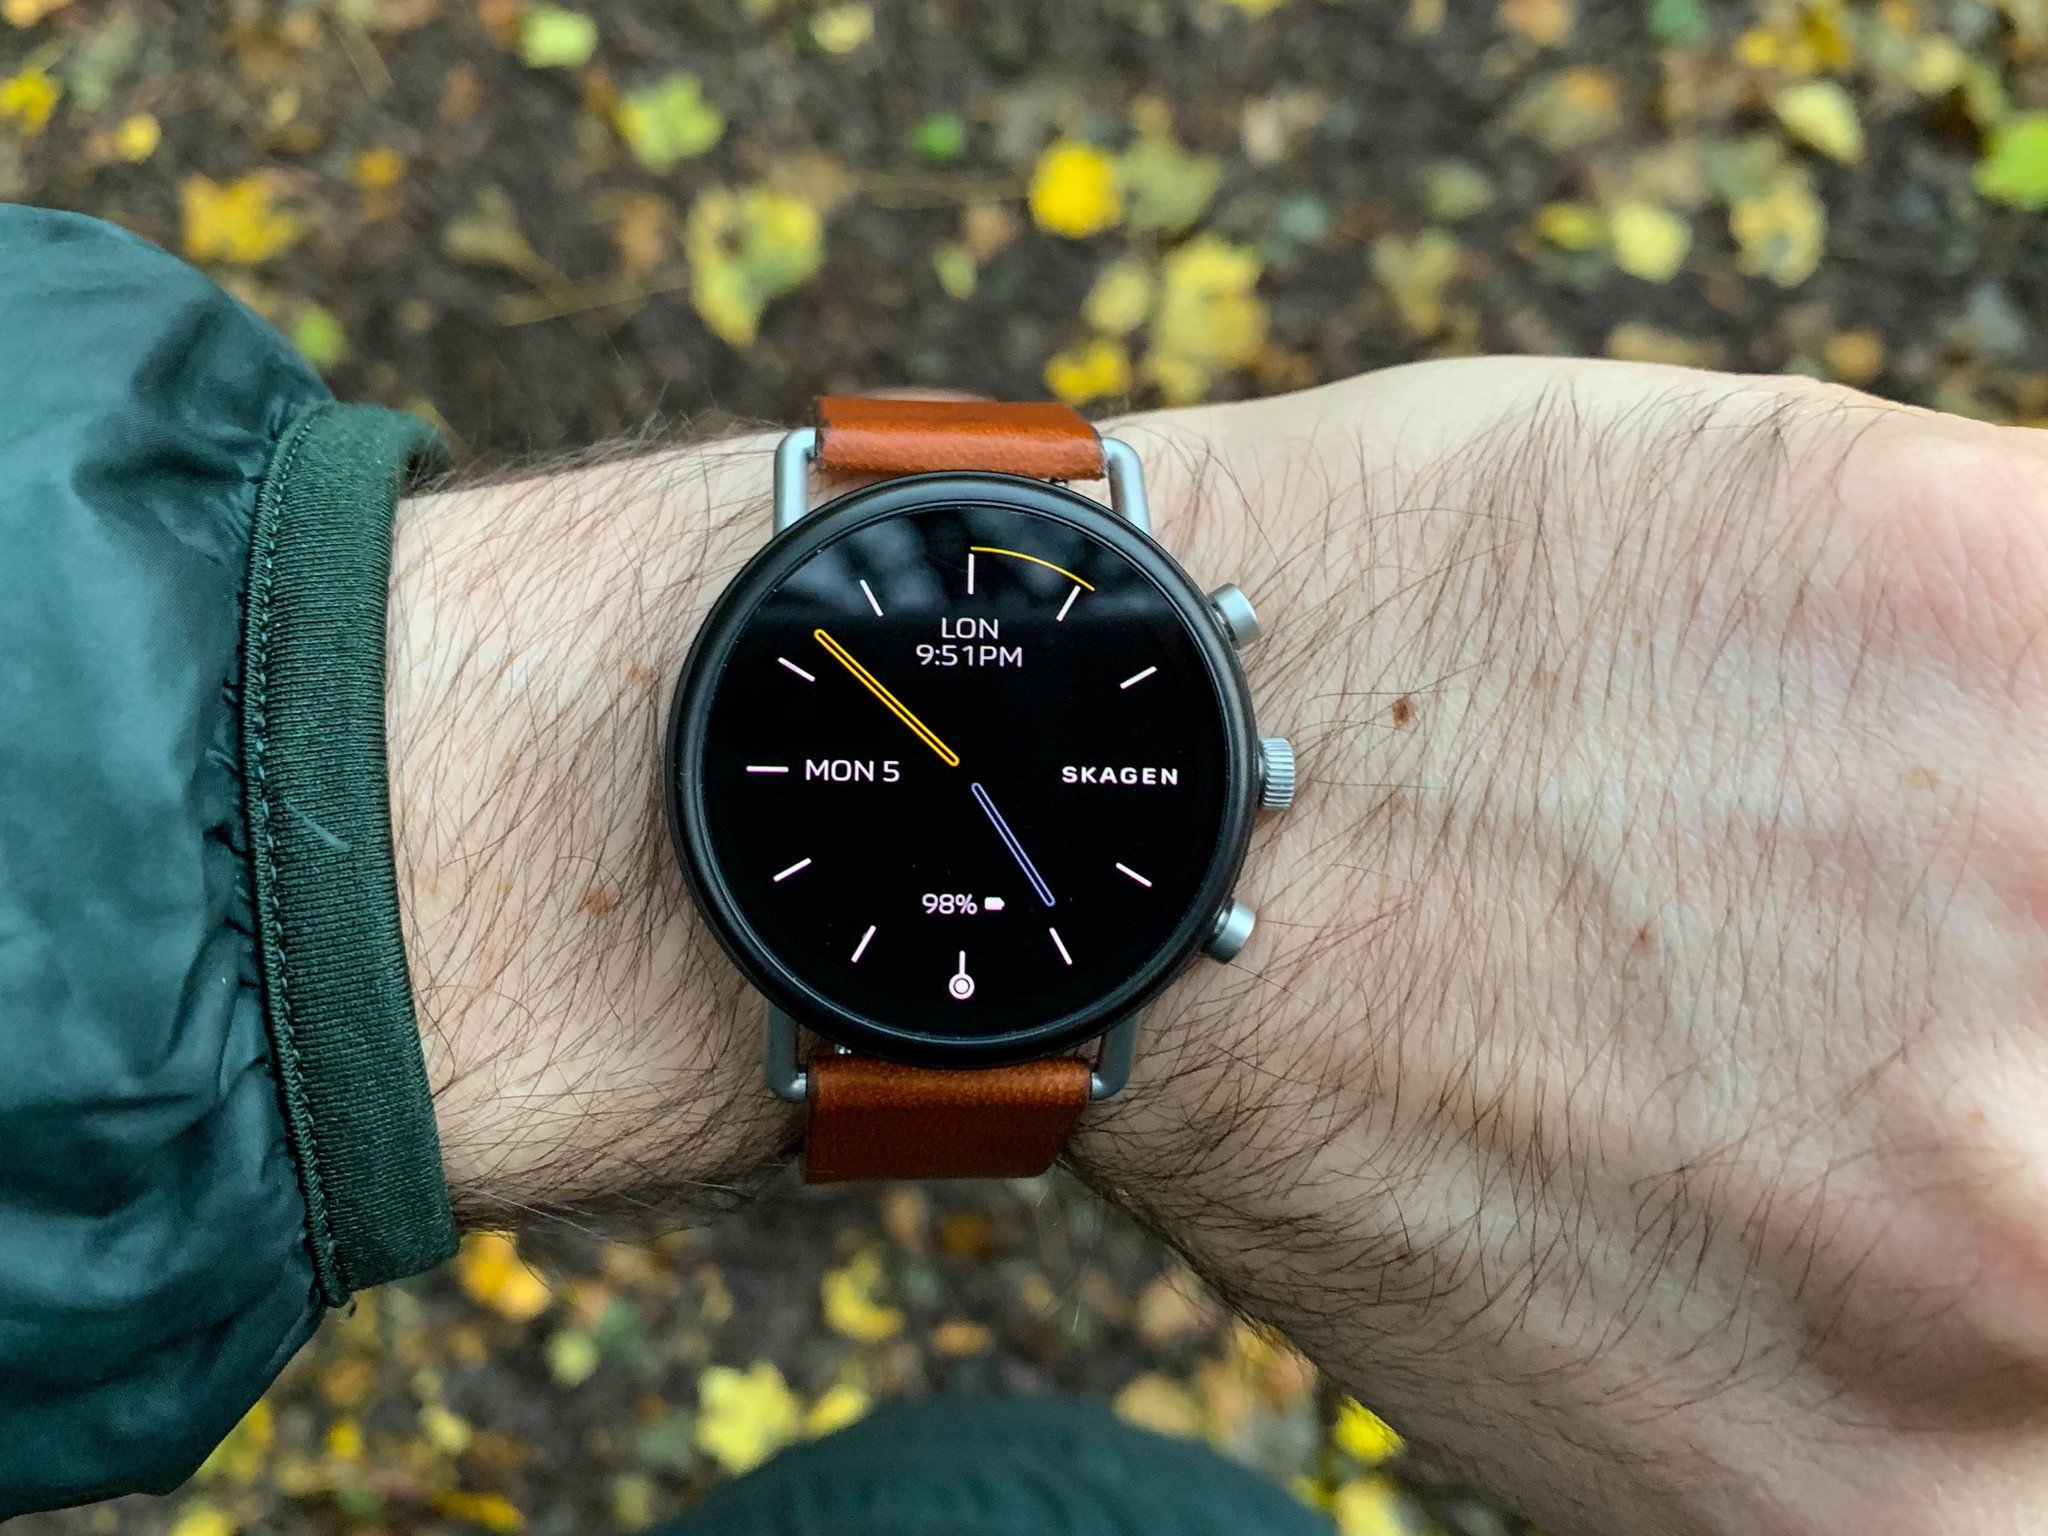 Skagen Falster 2 review: An attractive, flawed smartwatch that's easy